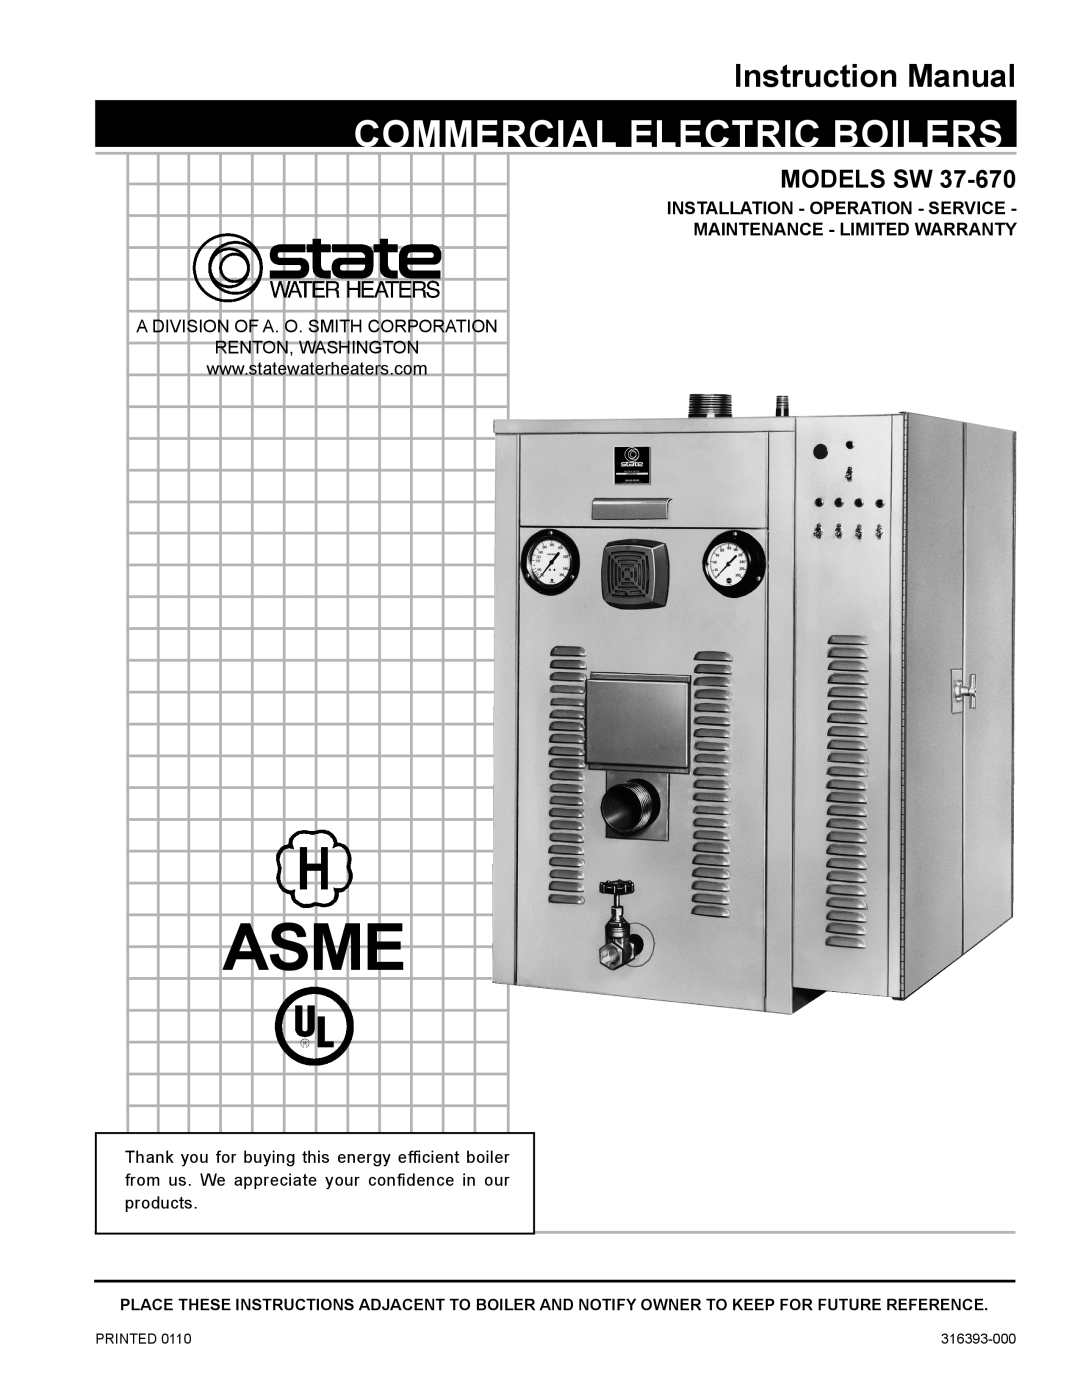 State Industries SW 37-670 instruction manual A Division Of A. O. Smith Corporation, Asme, Commercial Electric Boilers 